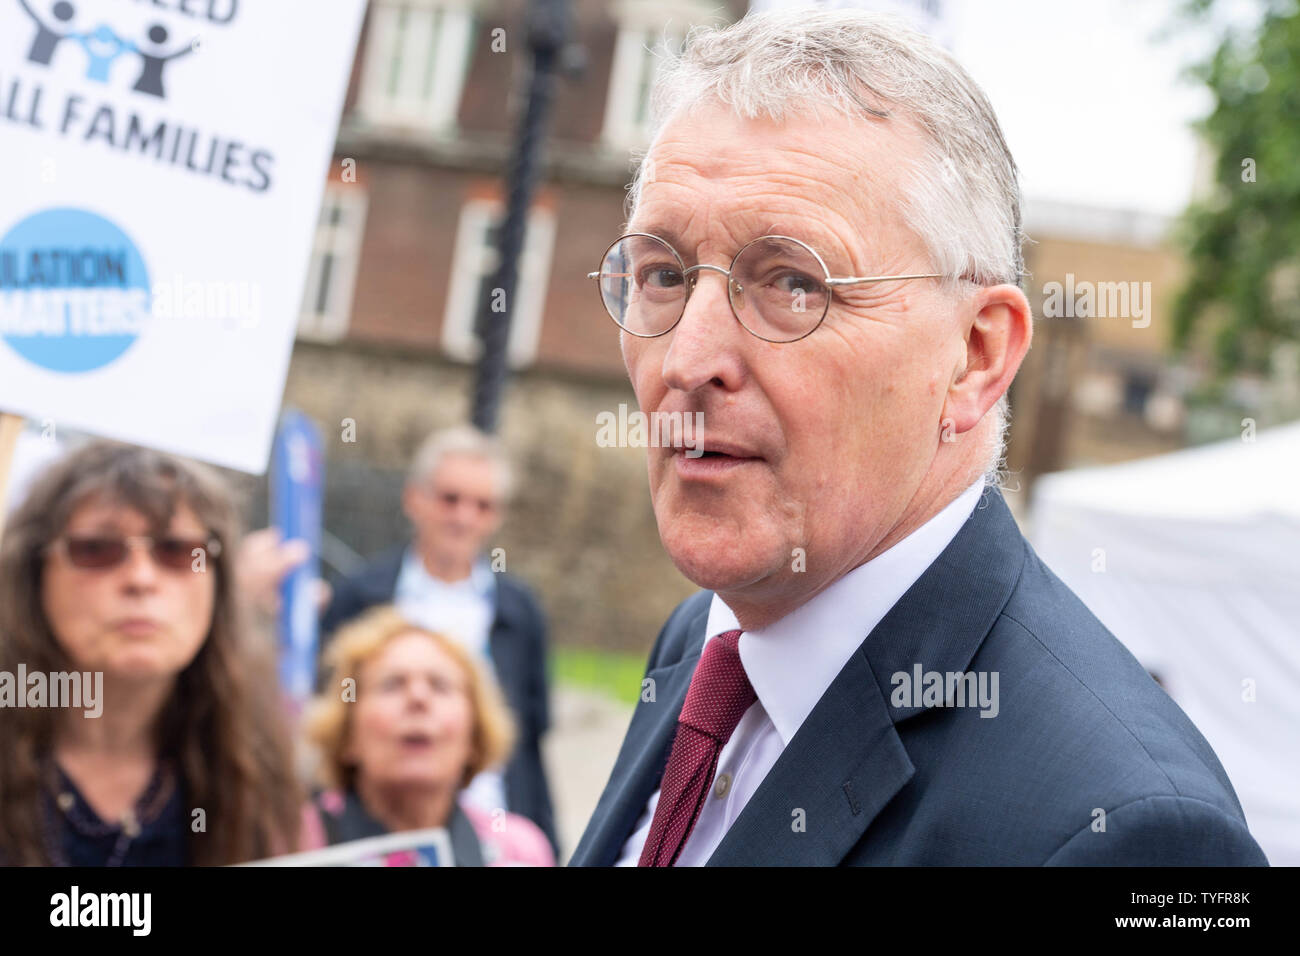 London, UK. 26th June 2019. The Time is now Climate Change mass lobby of MP's  Hilary Benn MP  Credit Ian Davidson/Alamy Live News Stock Photo